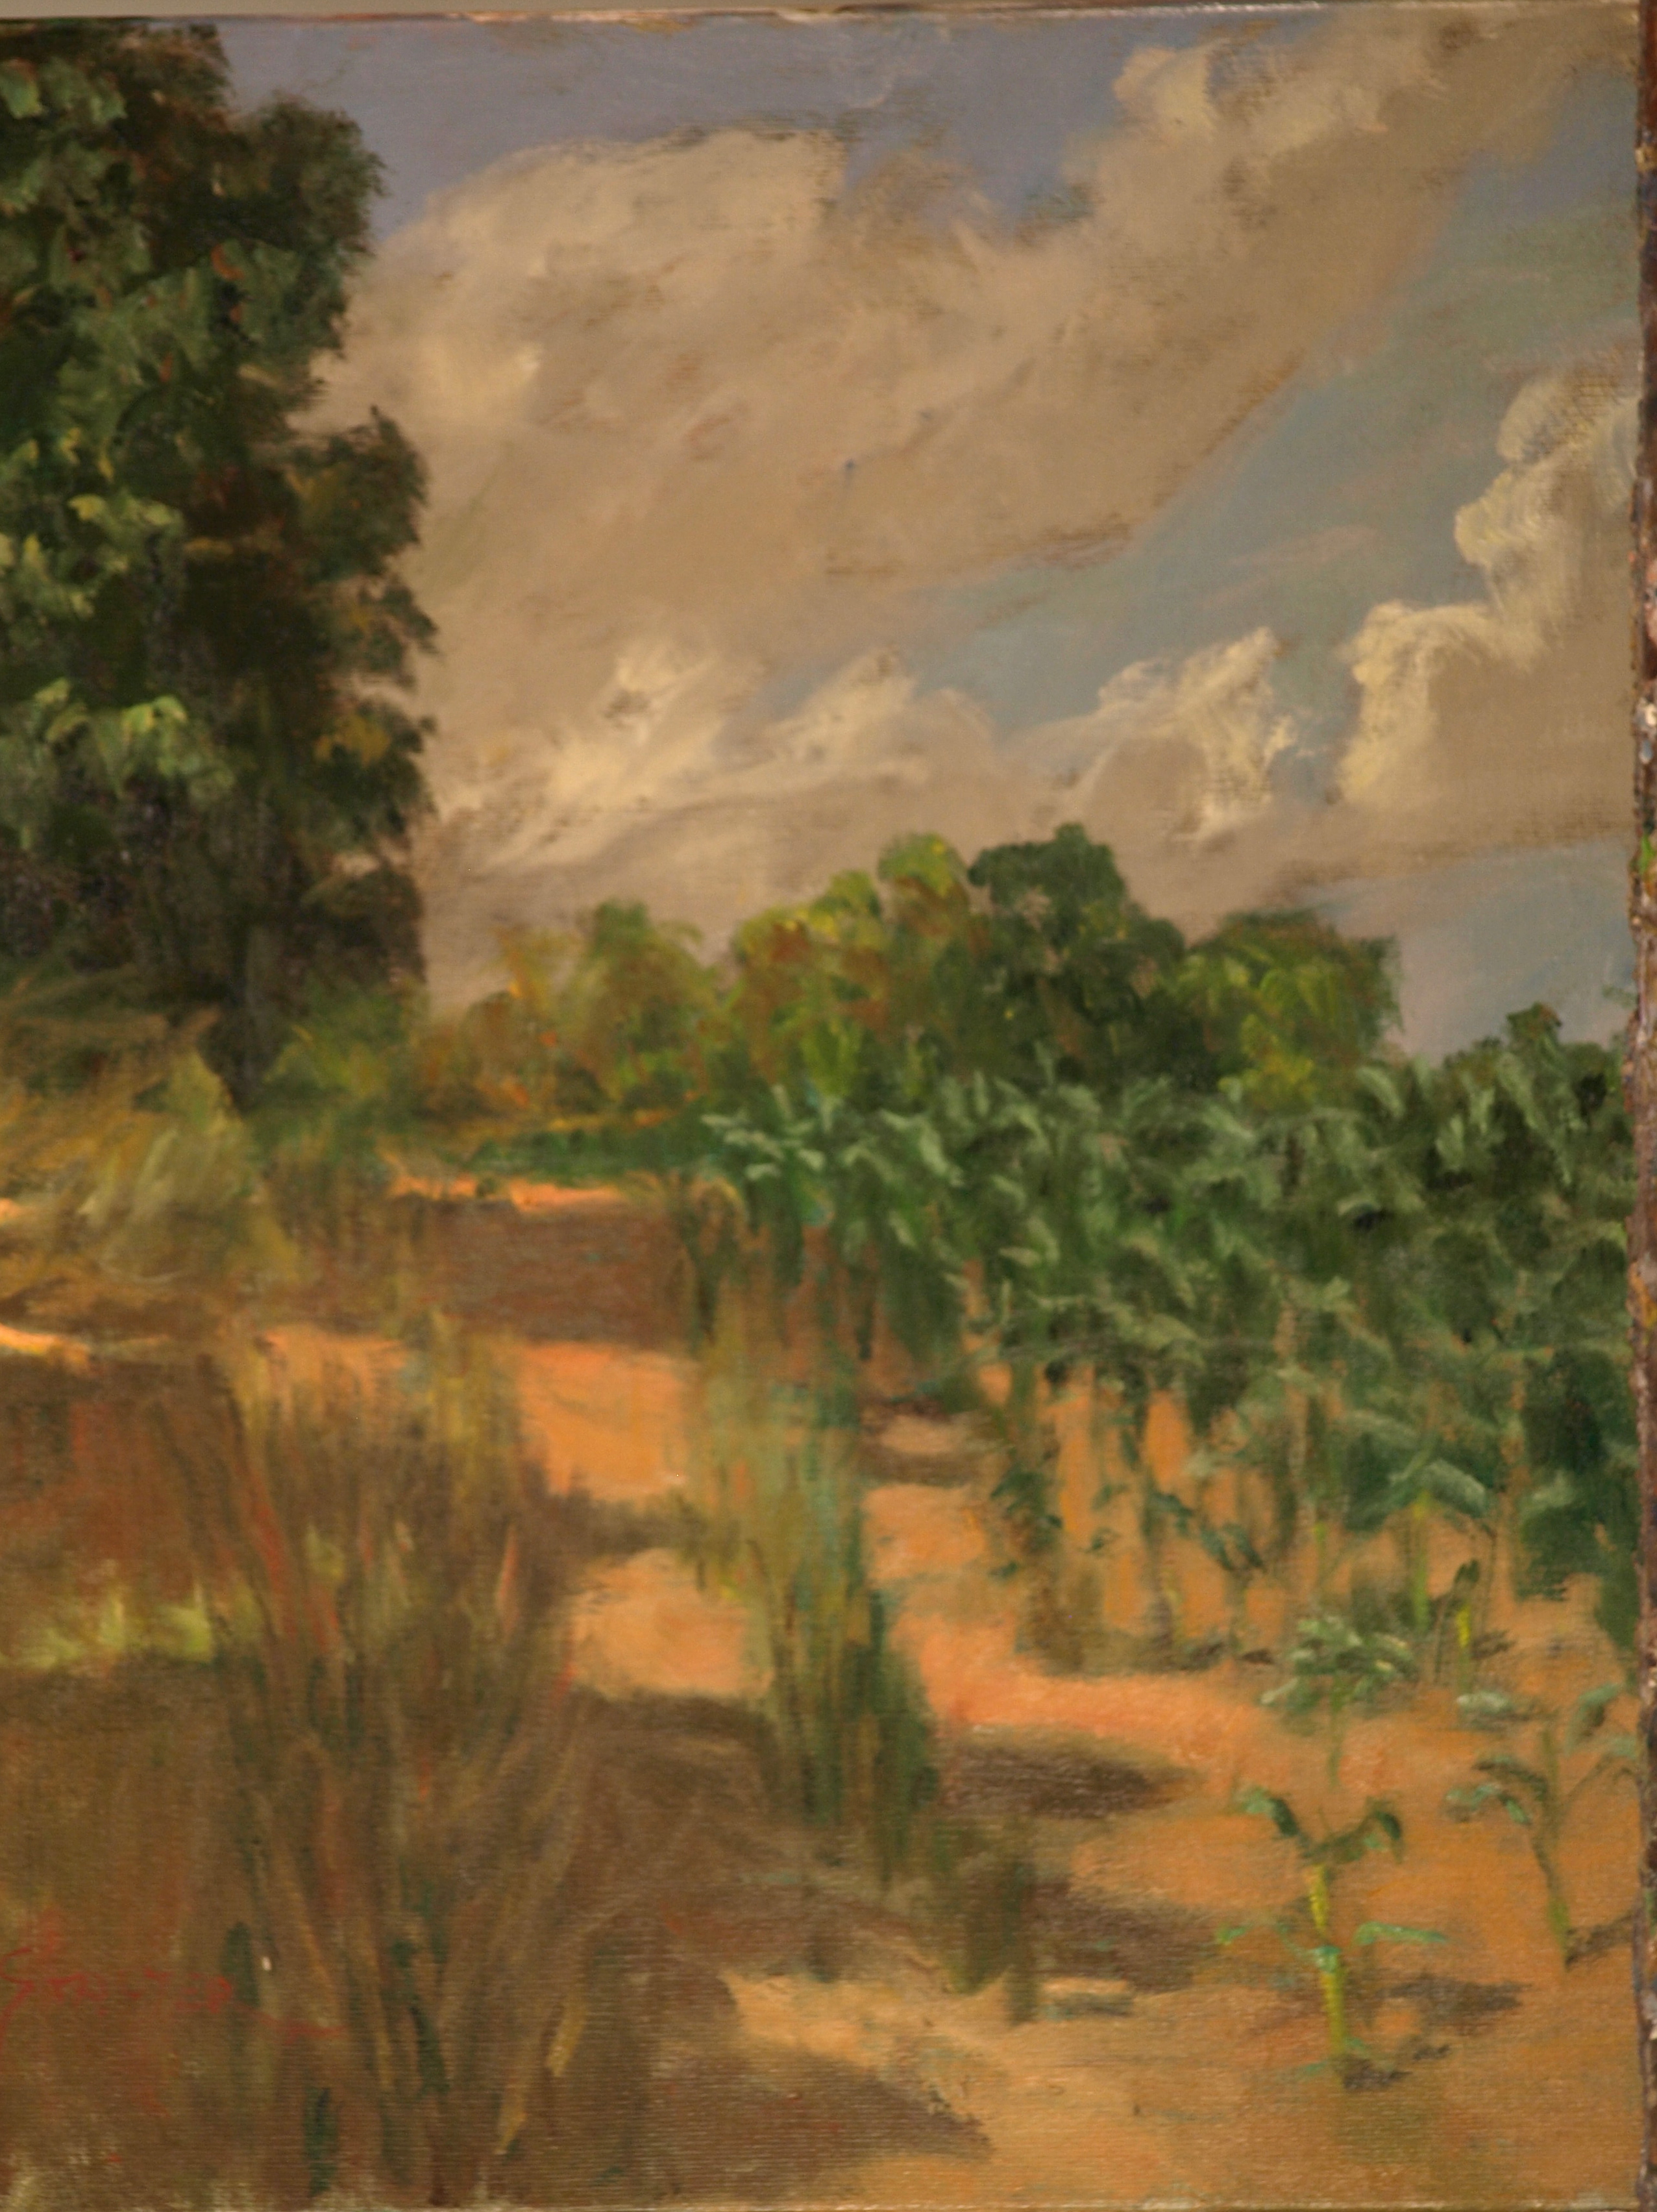 Edge of the Cornfield, Oil on Canvas, 20 x 16 Inches, by Richard Stalter, $450